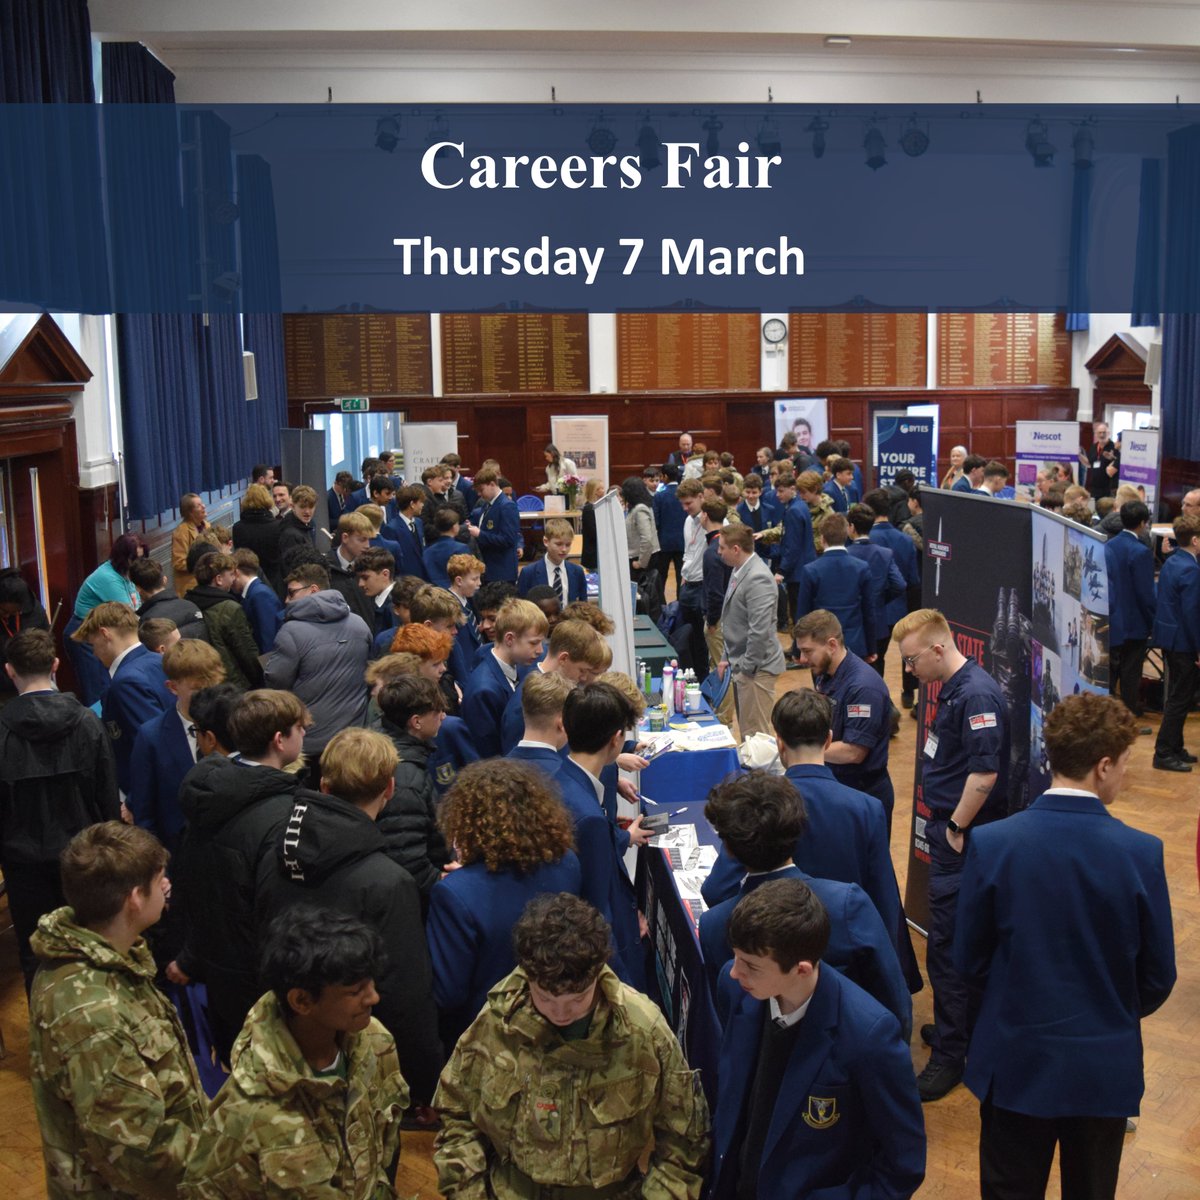 Last week we held our Annual Careers Fair for Years 7 - 13. The Careers Fair provides our students with an opportunity to find out more about future careers & education opportunities which are open to them. #careersfair #nextsteps #futureplans
@glynsixthform #nationalcareersweek